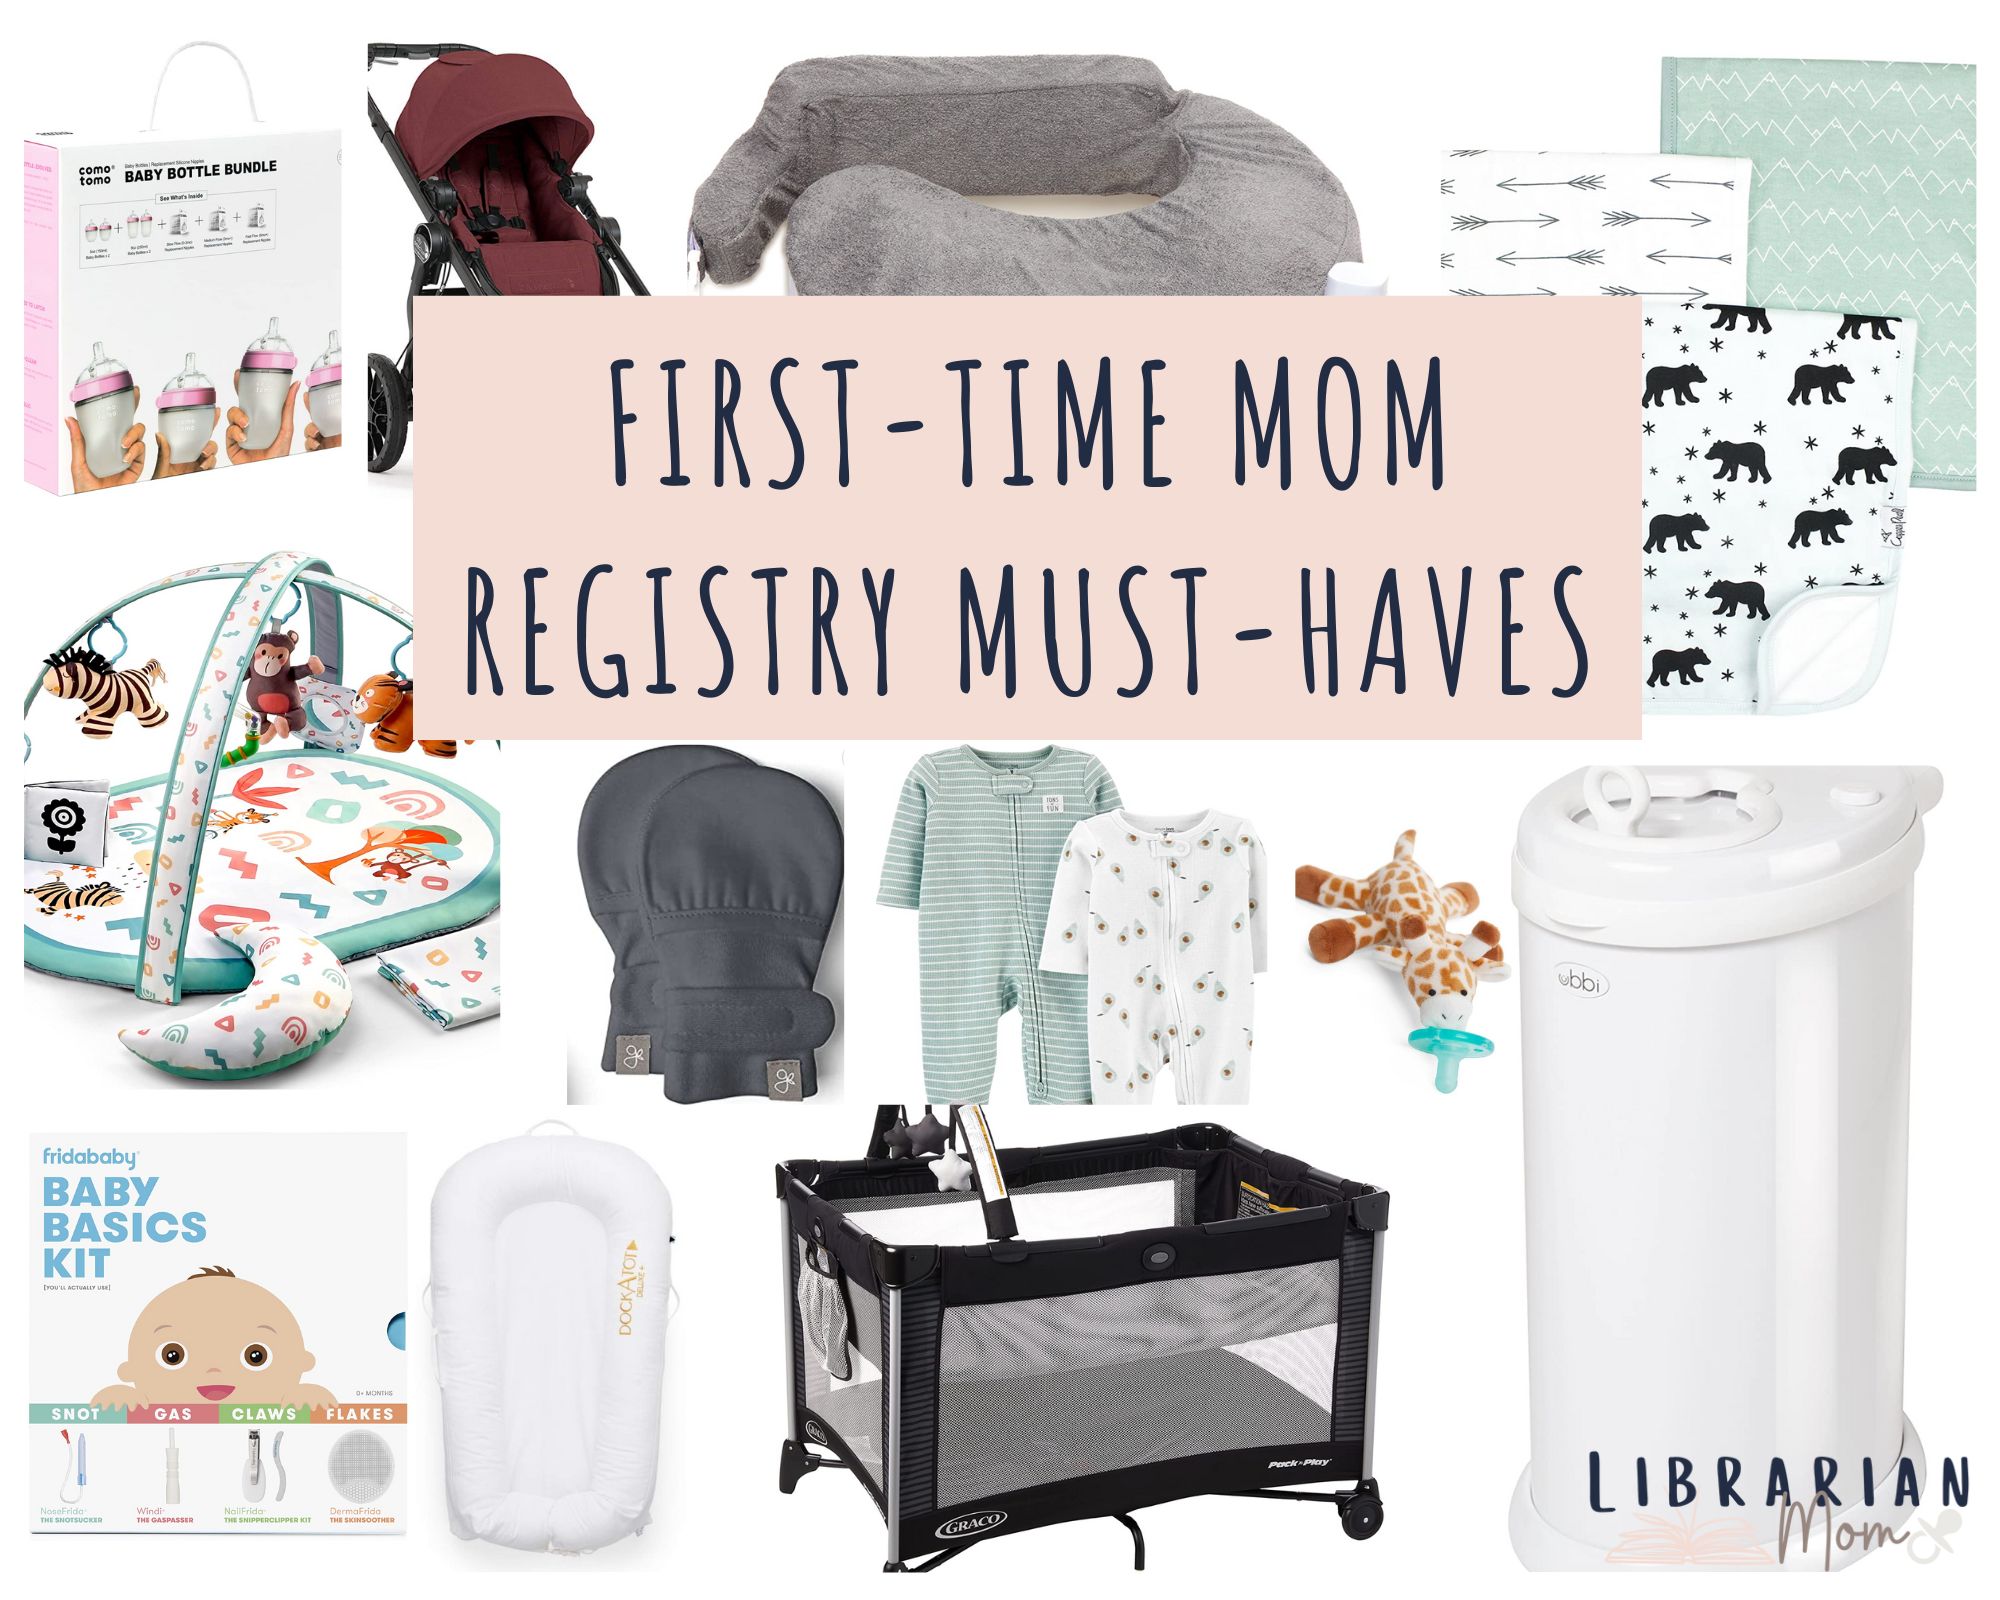 The Complete List: 15 Must-Haves for New Moms